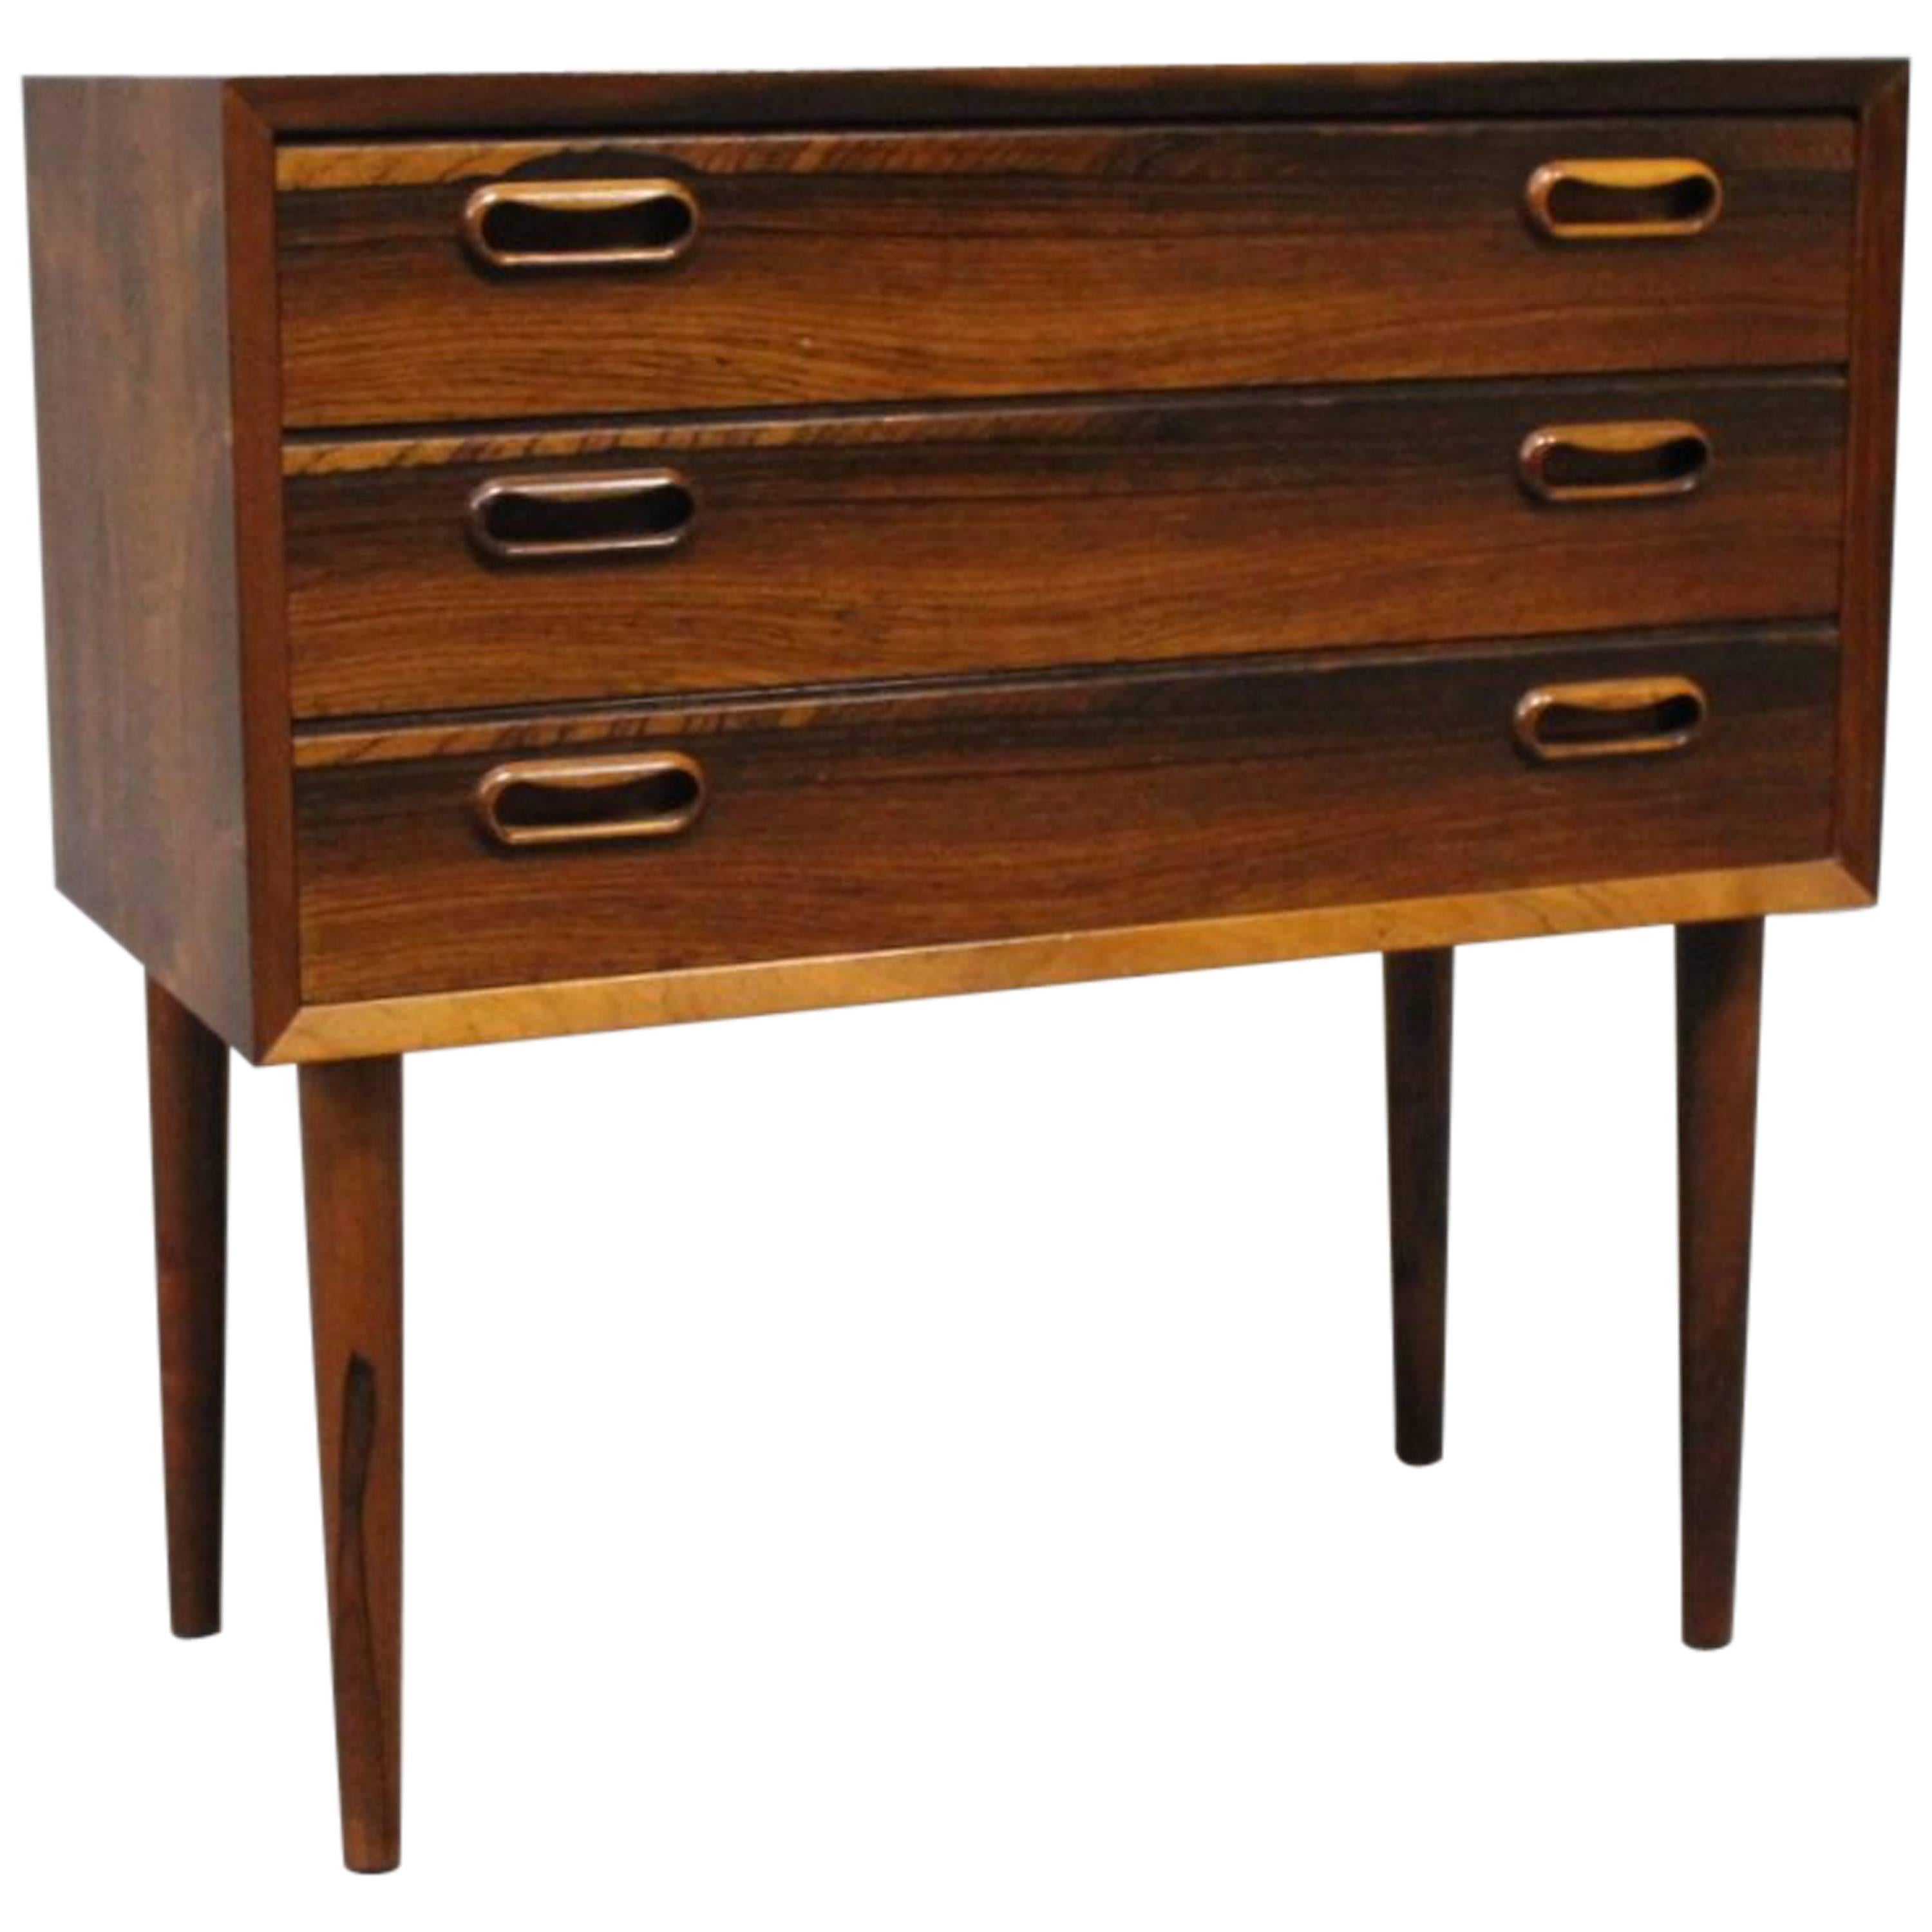 Small Chest of Drawers in Rosewood of Danish Design from the 1960s